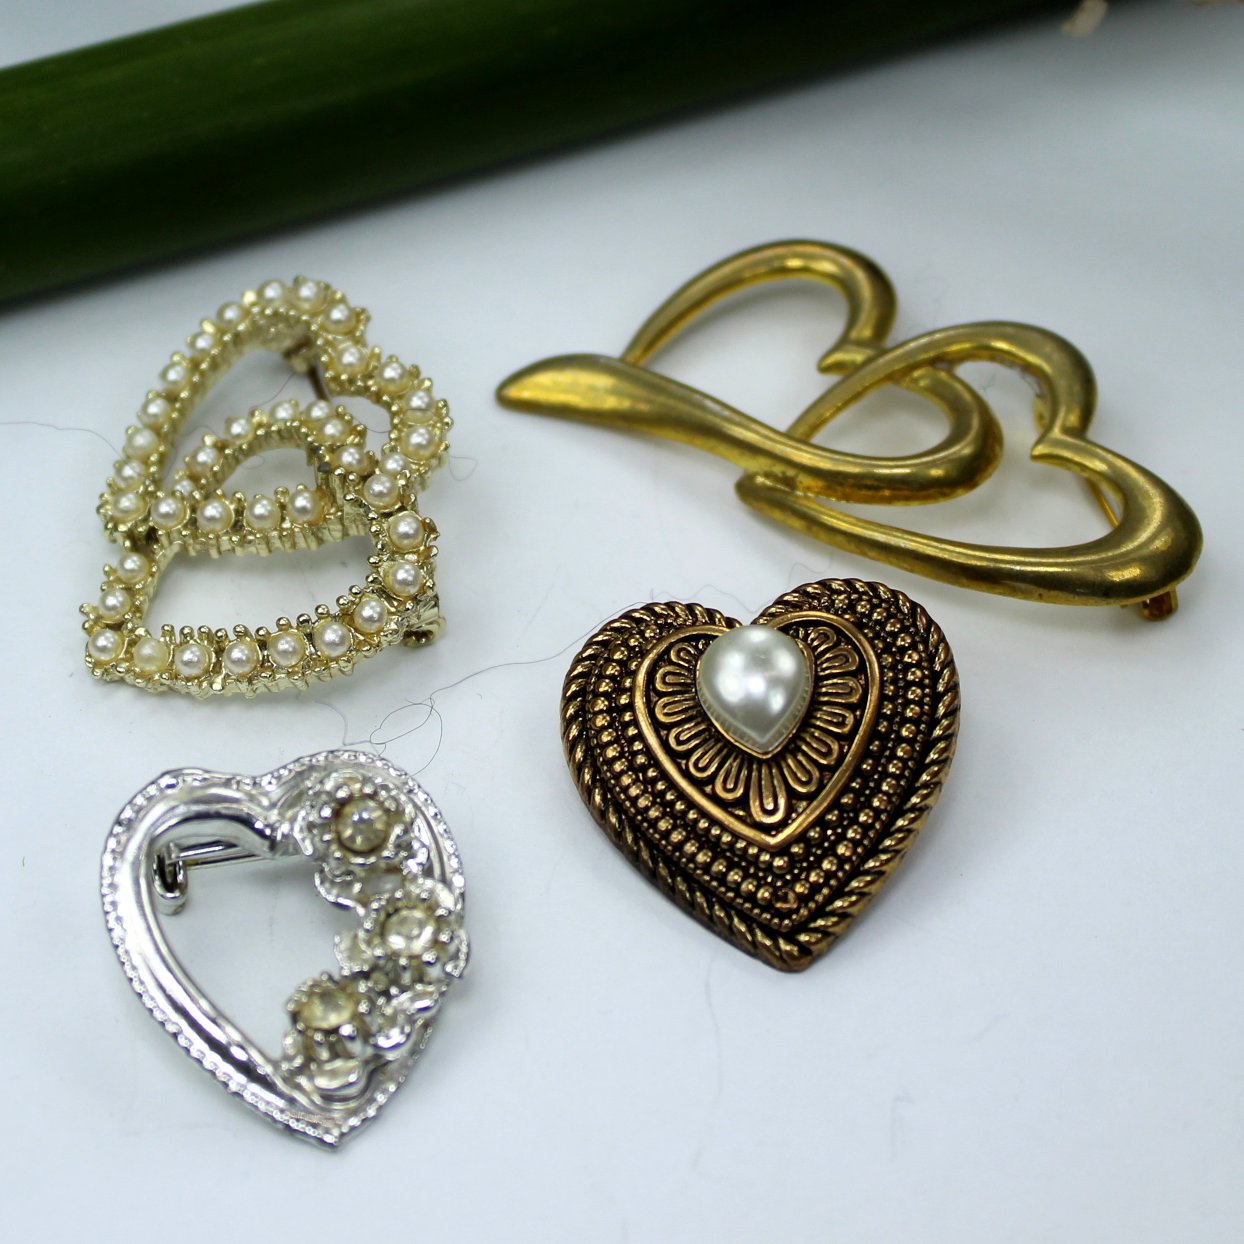 Collection 4 Heart Pins Brooches Vintage Costume 2 double hearts